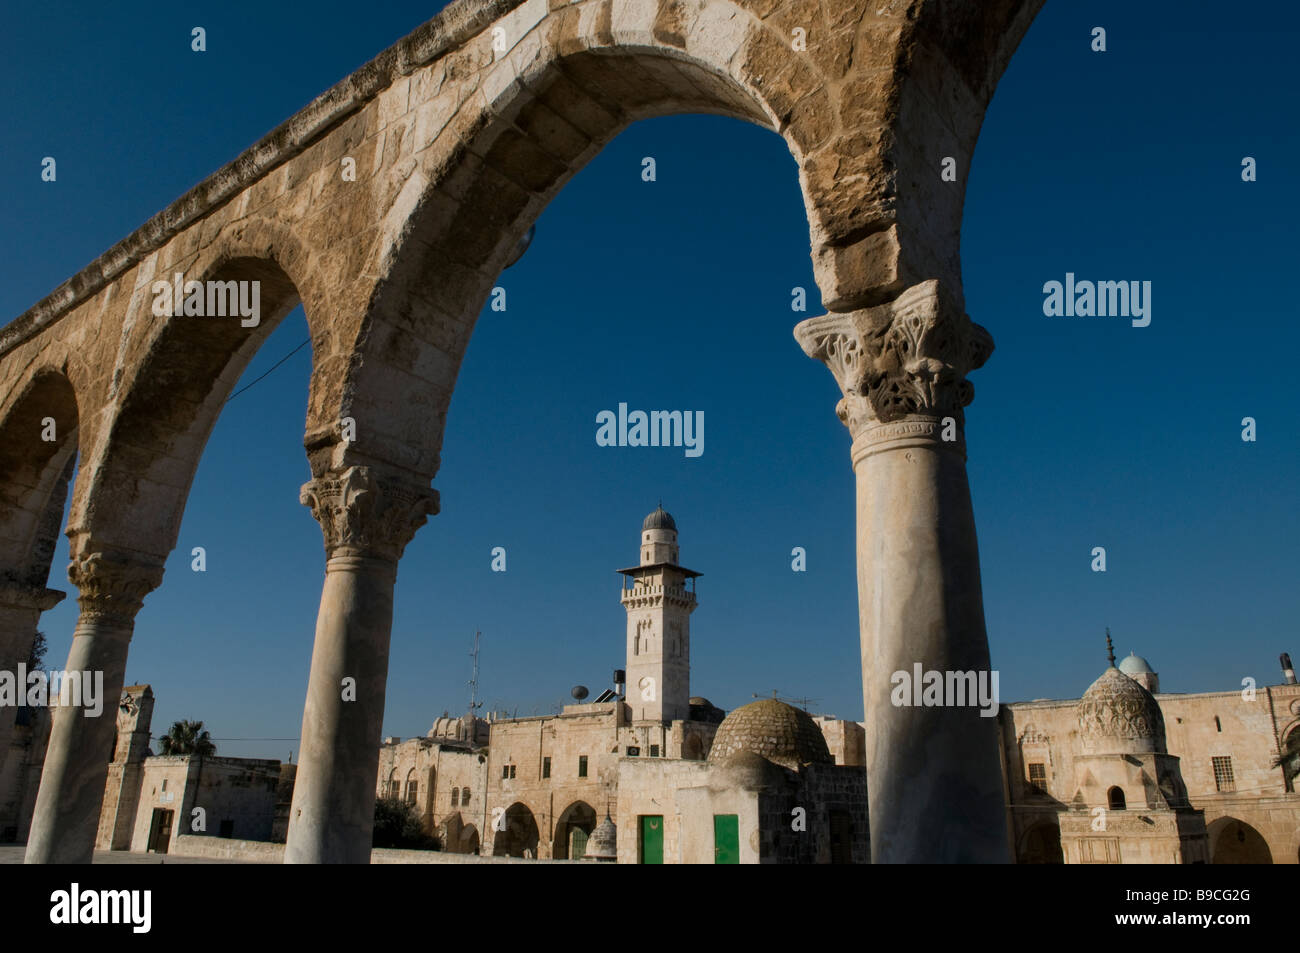 The south western arcade constructed in 1472 during the Mamluk period in the Temple Mount or Haram esh-Sharif in the Old City Jerusalem Israel Stock Photo